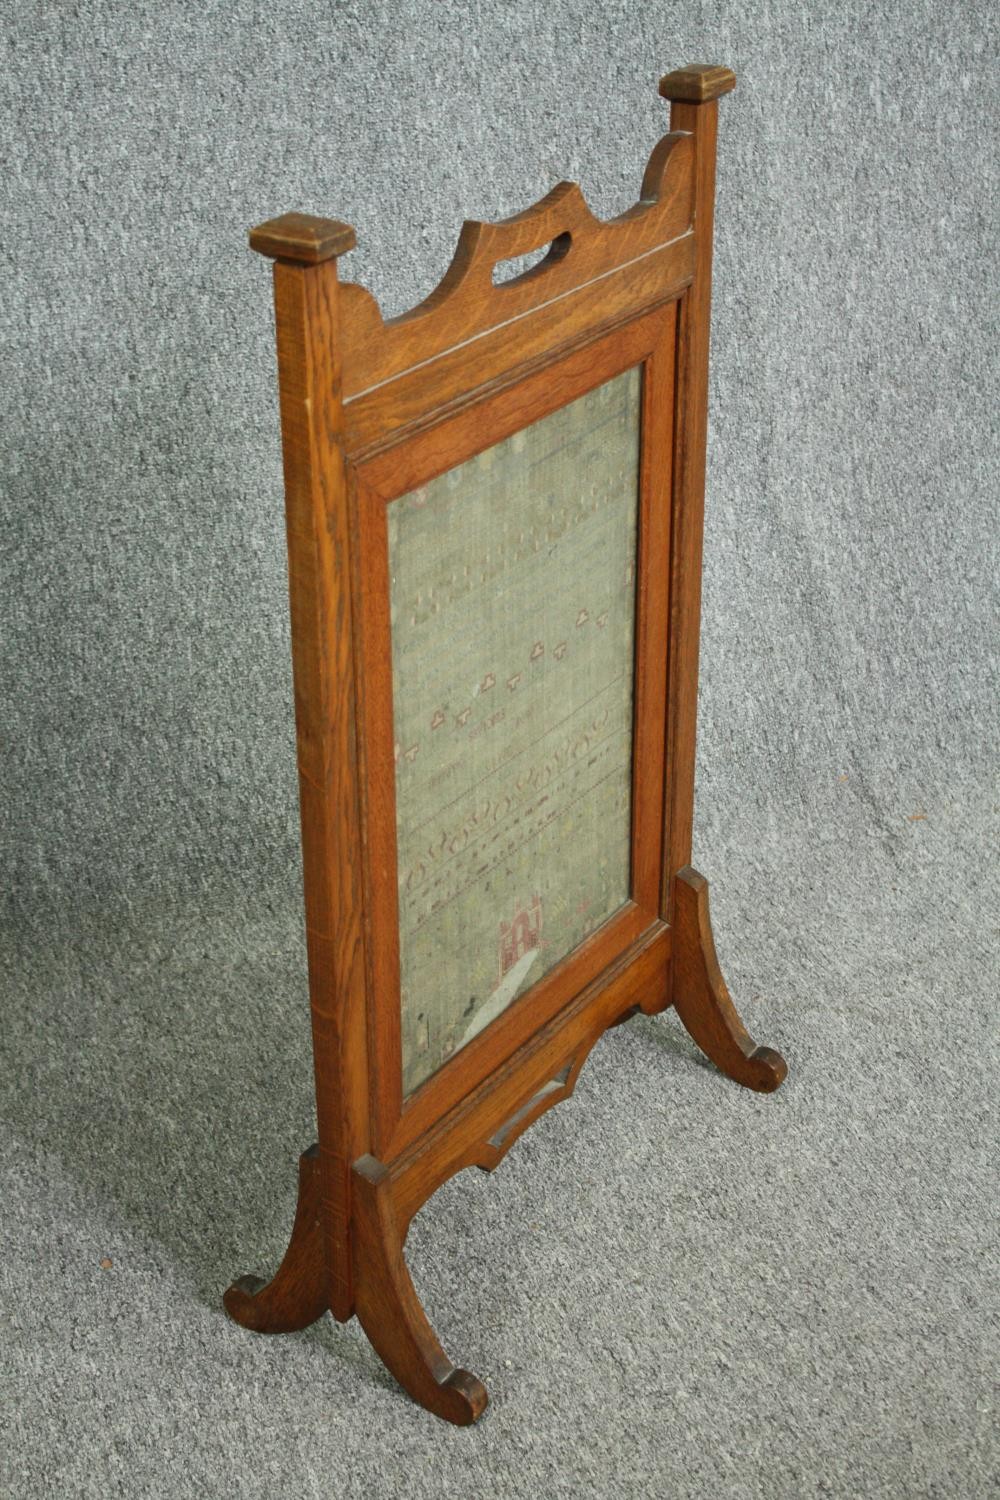 A late 19th century Arts and Crafts oak fire screen inset with a glazed needlework sampler. H.81 W. - Image 2 of 4